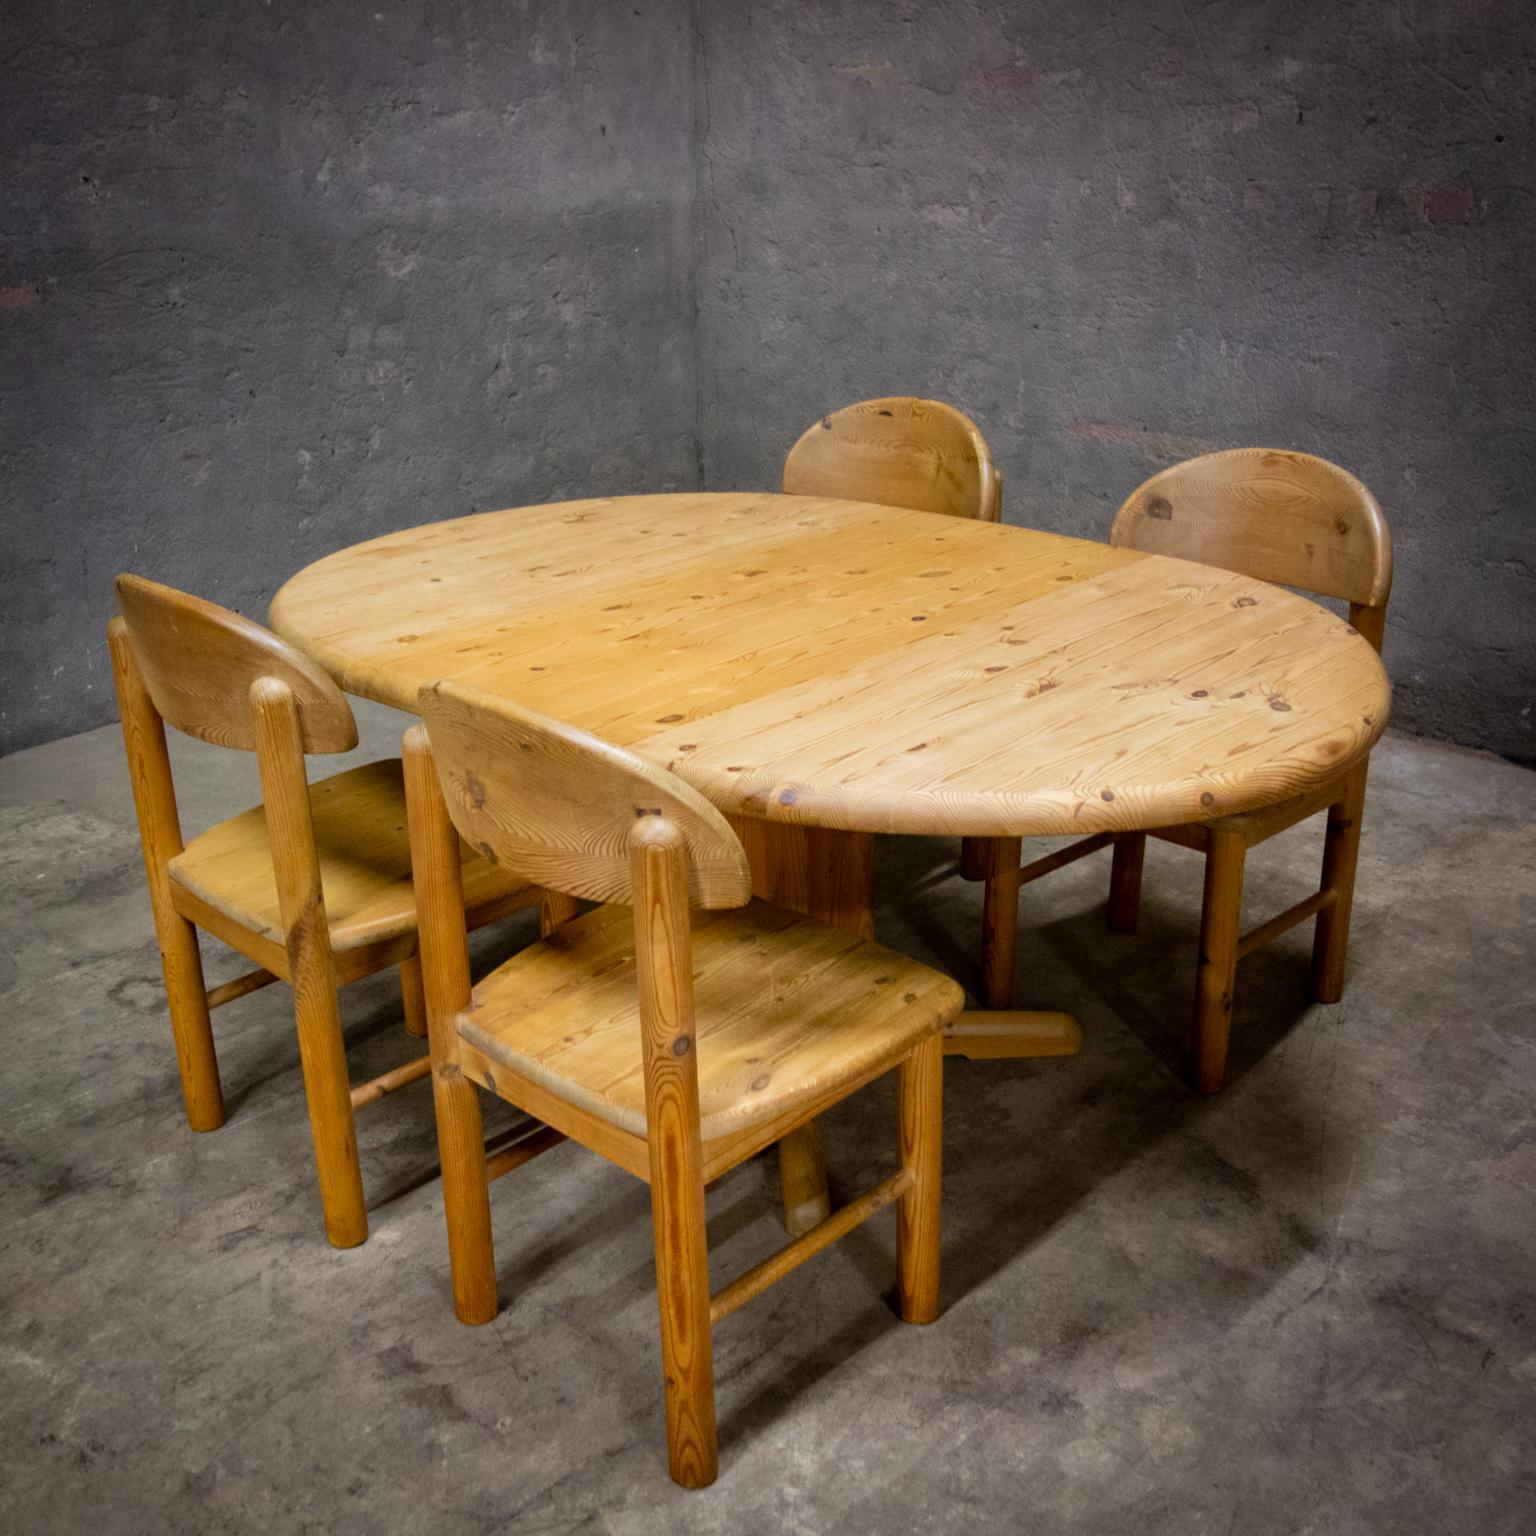 Scandinavian Modern Set of 4 Chairs and Table by Rainer Daumiller for Hirtshal Sawmill, Denmark 1970